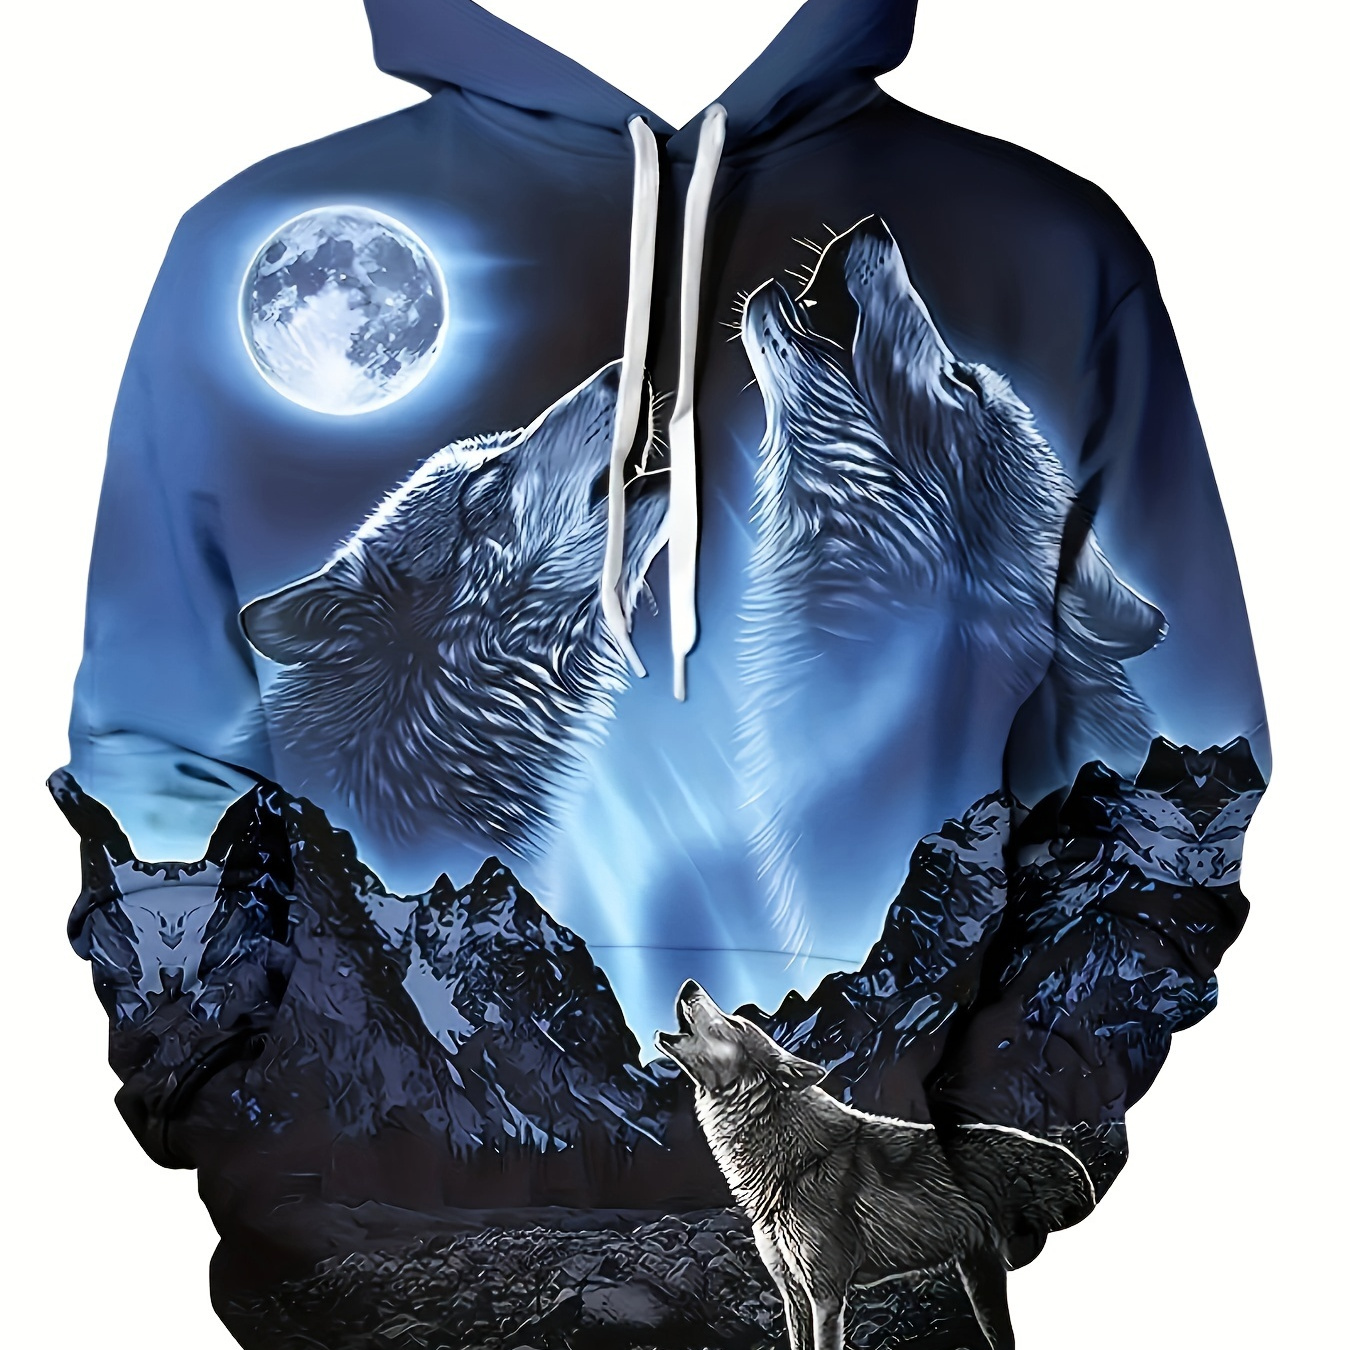 

Wolf Moon Print Men's Pullover Round Neck Hoodies With Kangaroo Pocket & Drawstring Long Sleeve Hooded Sweatshirt Loose Casual Top For Autumn Winter Men's Clothing As Gifts